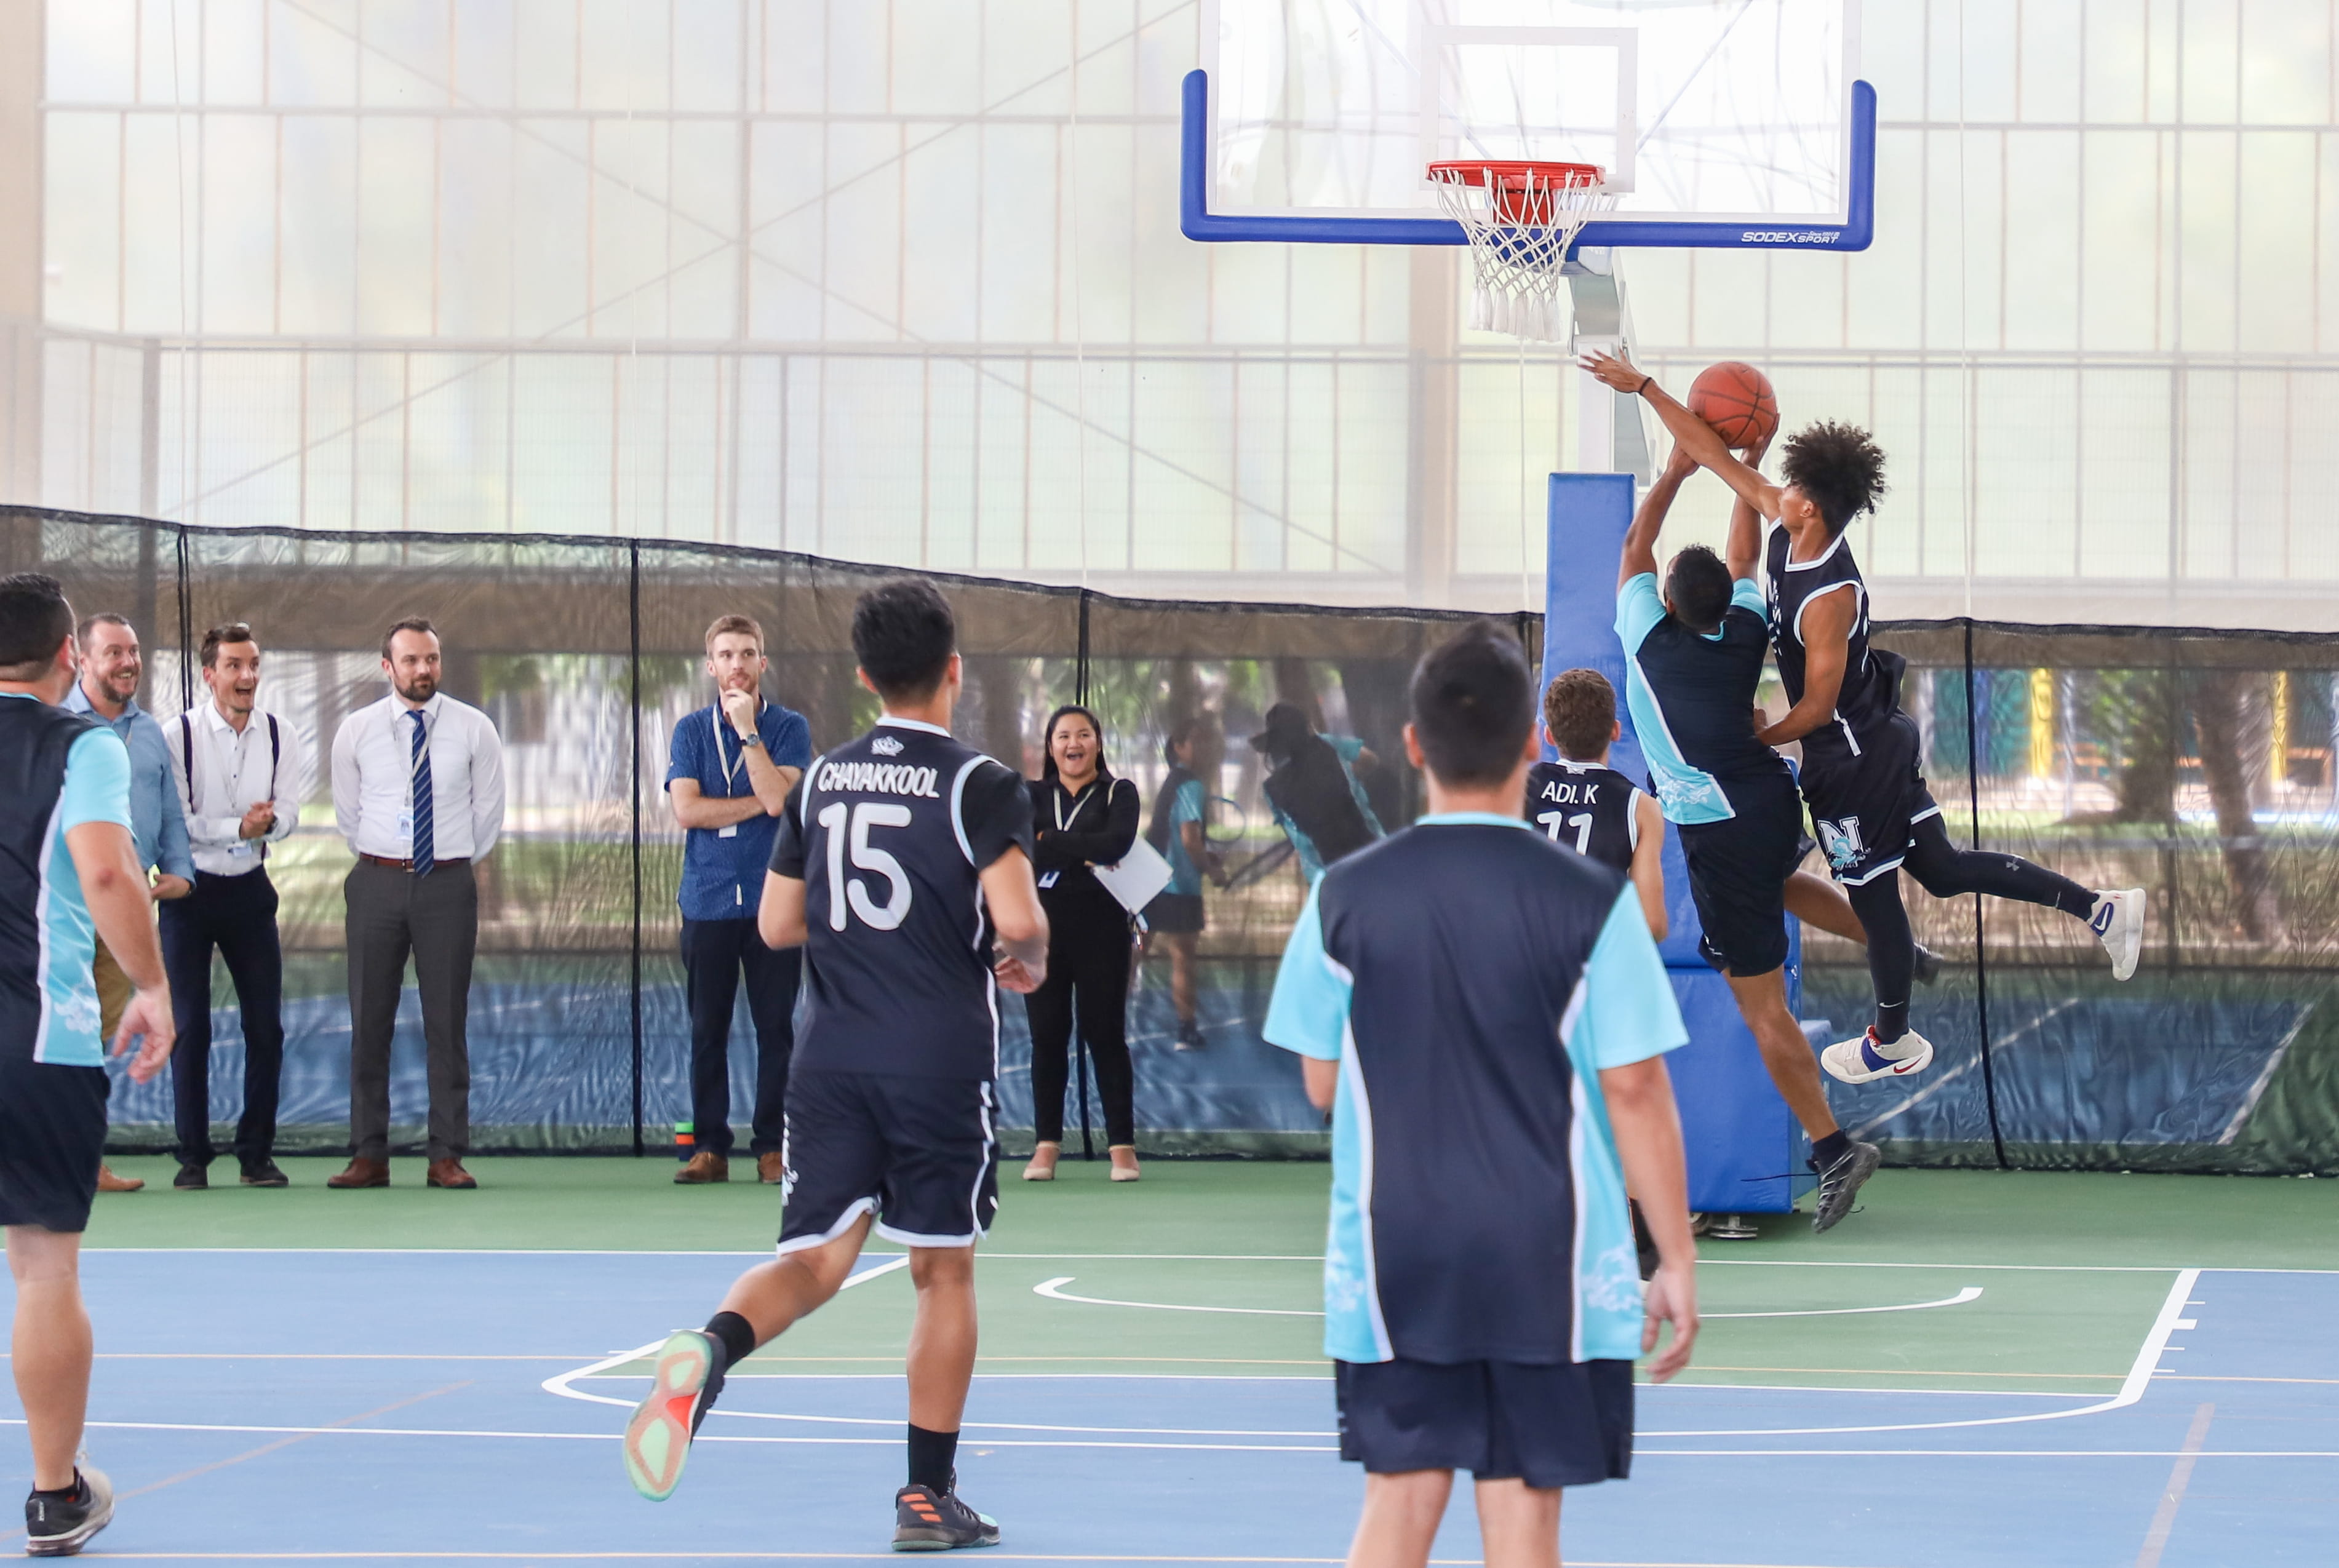 New Northbridge Sports Hall opened by Nord Anglia CEO-new-northbridge-sports-hall-opened-by-nord-anglia-ceo-NISCOrientation 10082018101